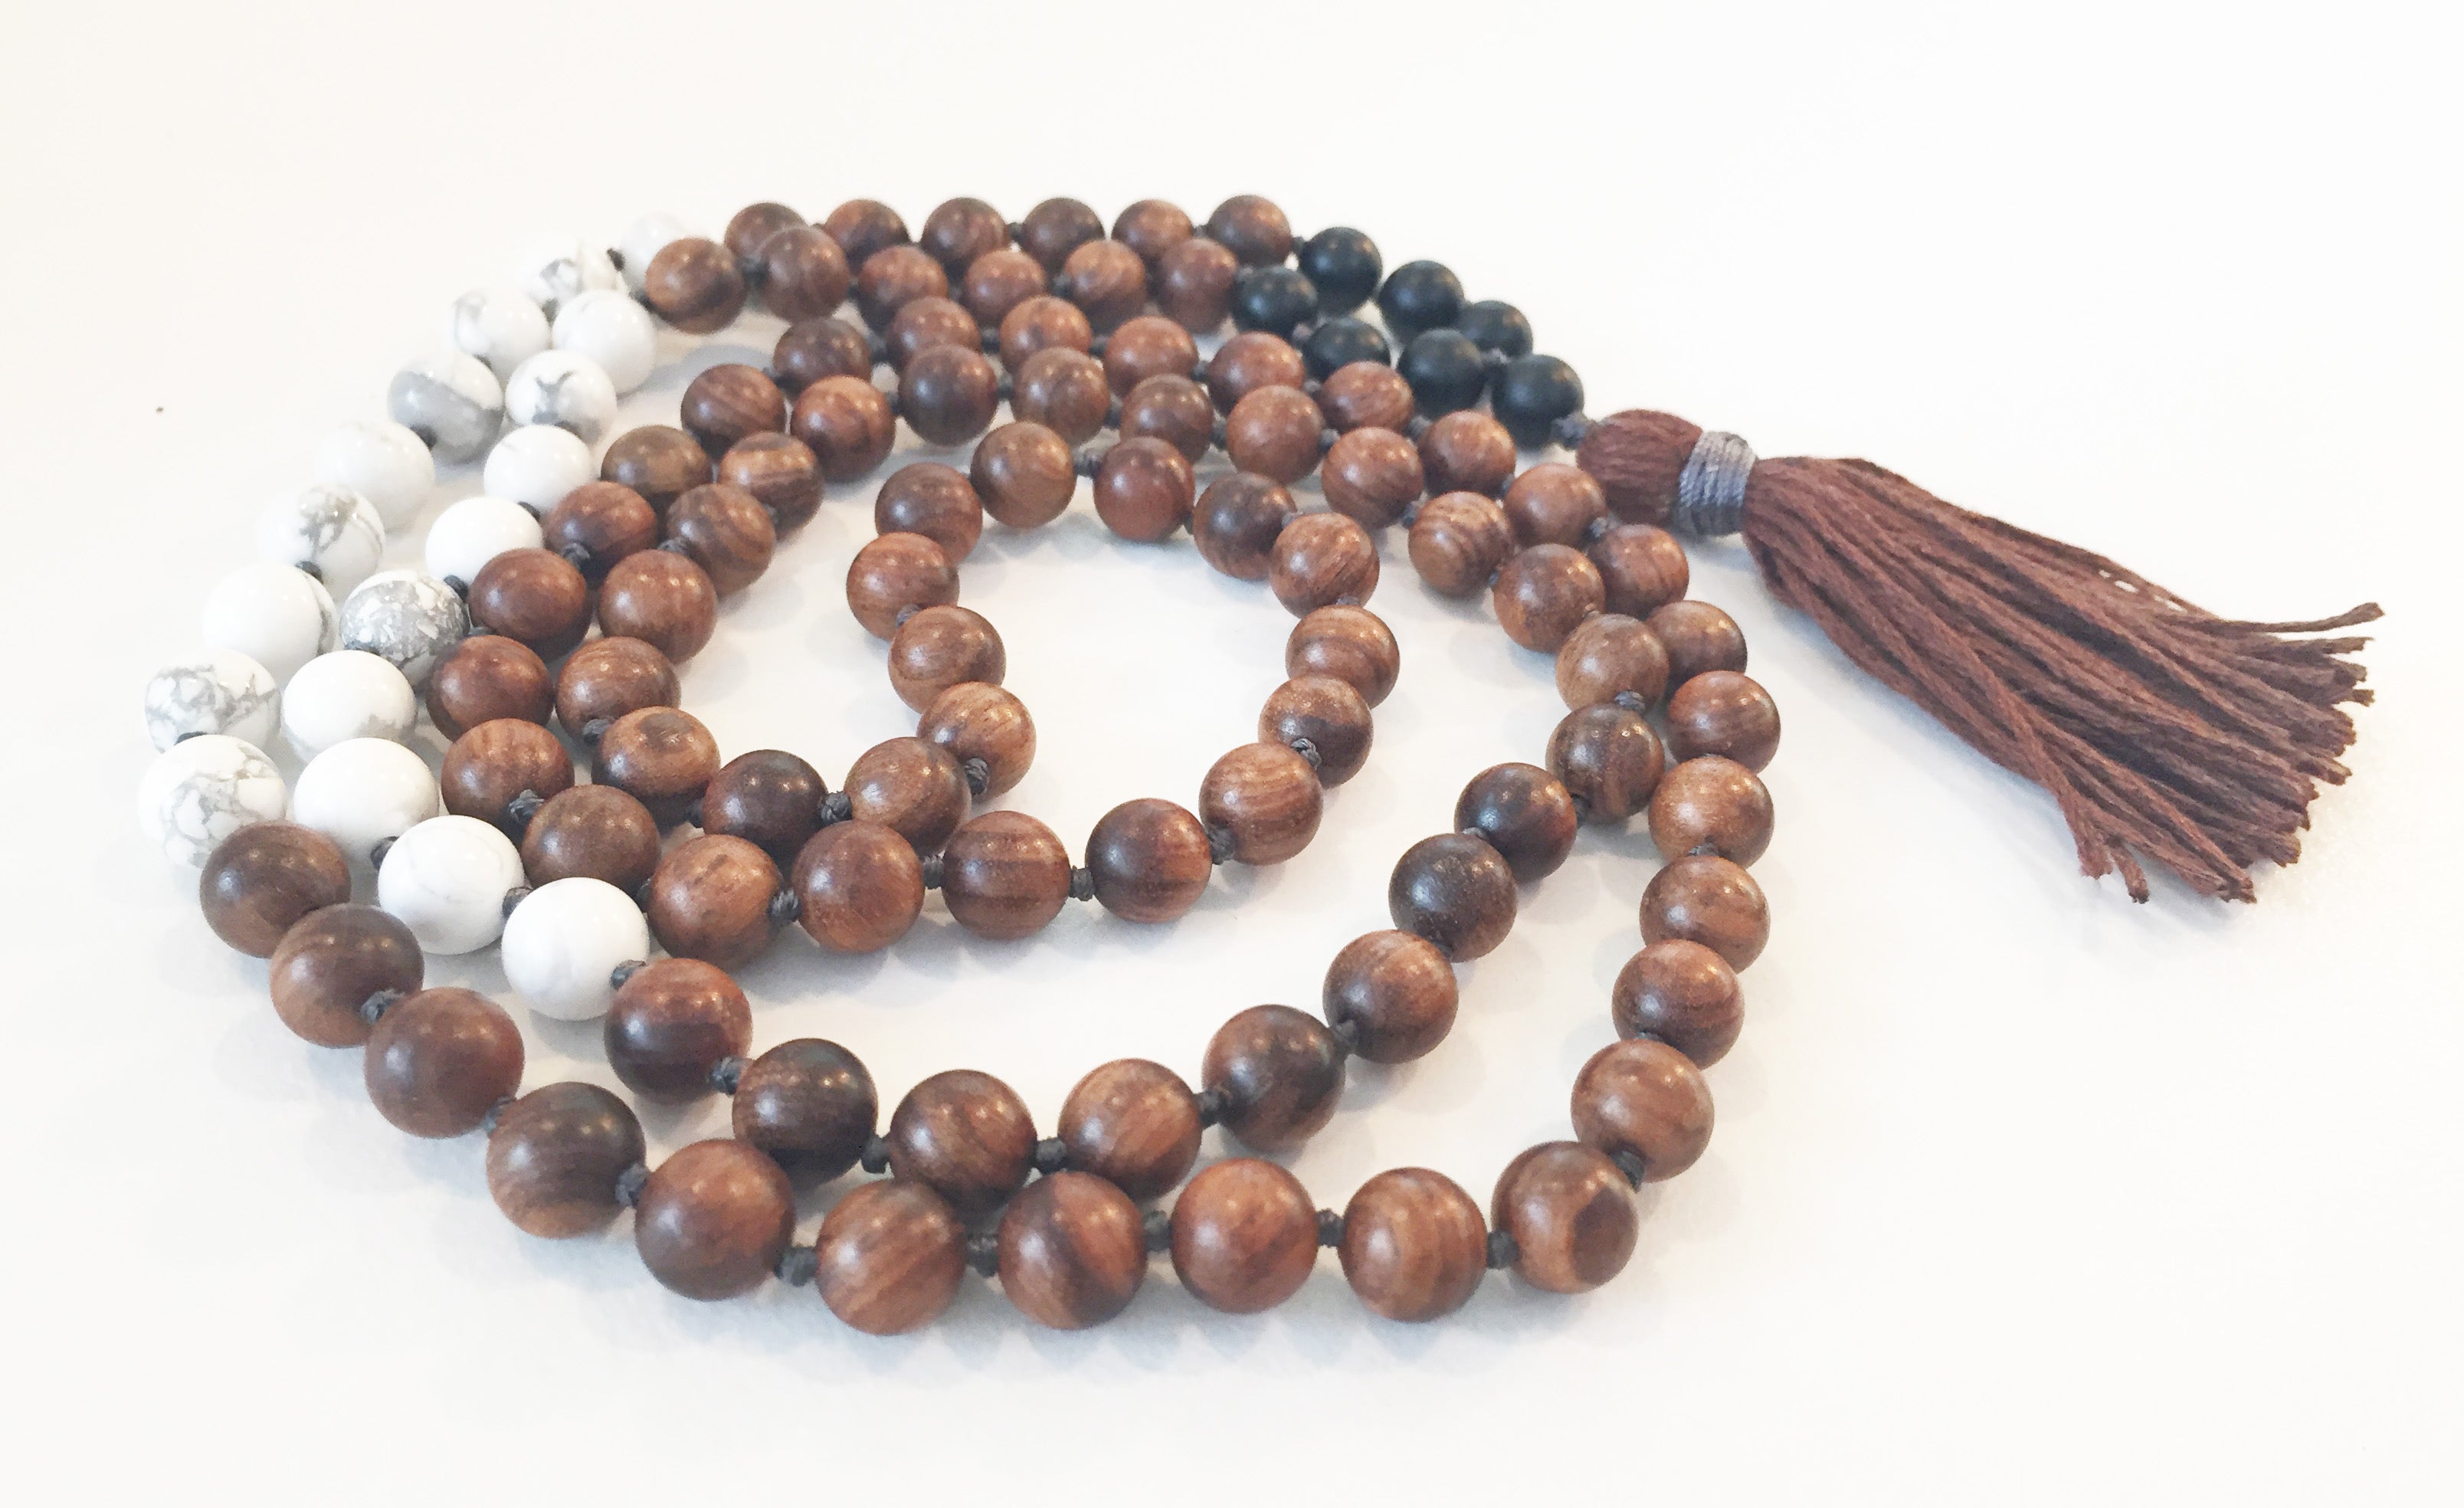 8mm Pear Wood & Howlite 108 Knotted Mala Necklace with Colored Tassel